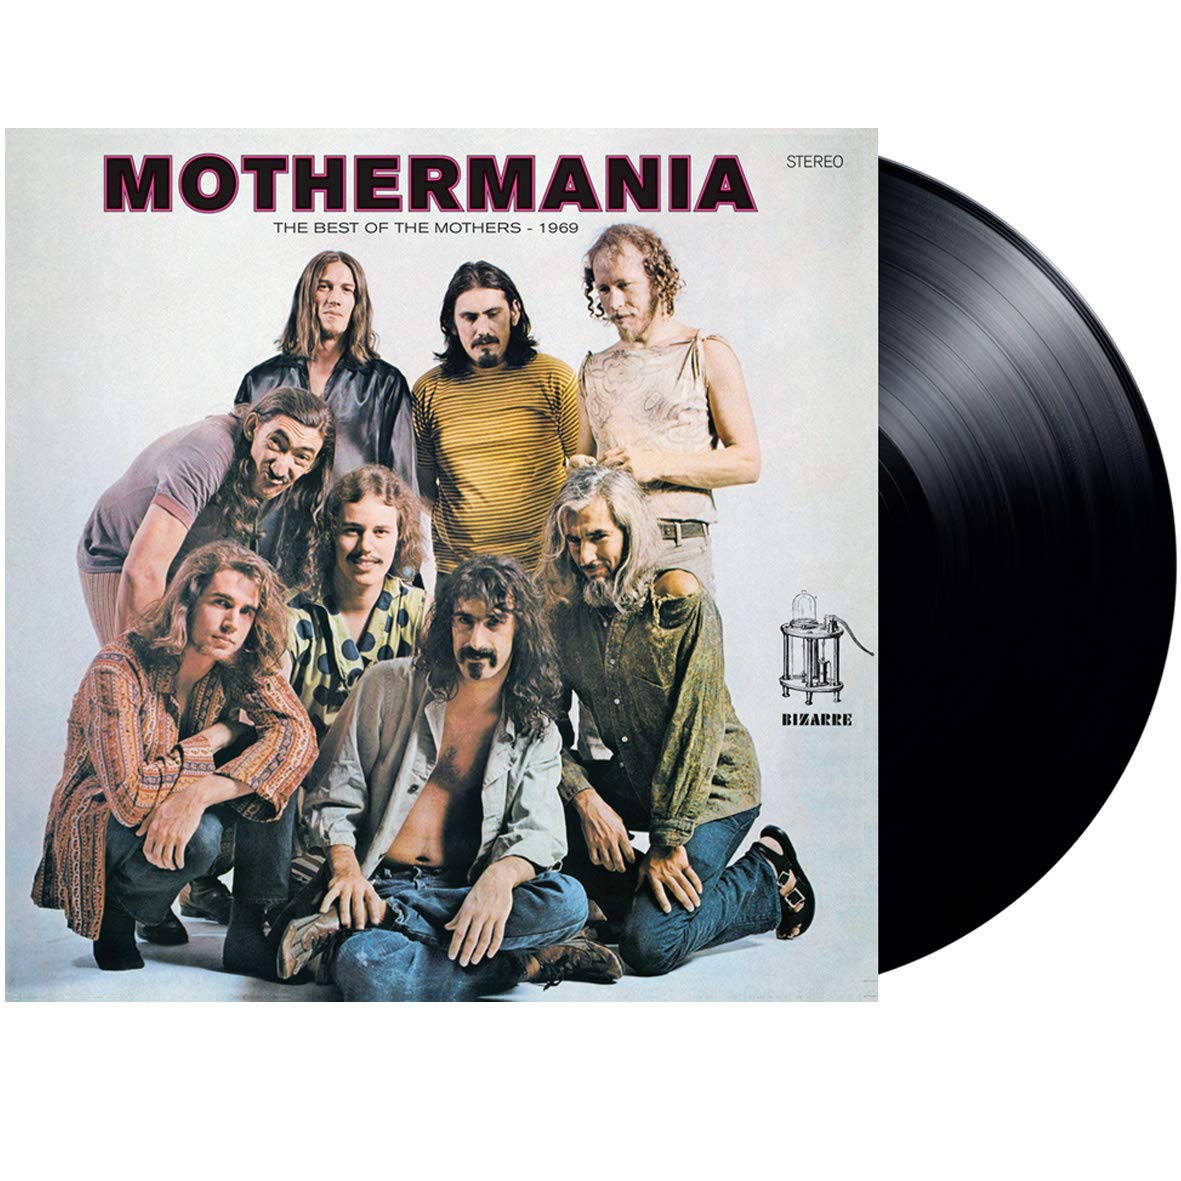 Zappa, Frank - Mothermania: The Best Of The Mothers